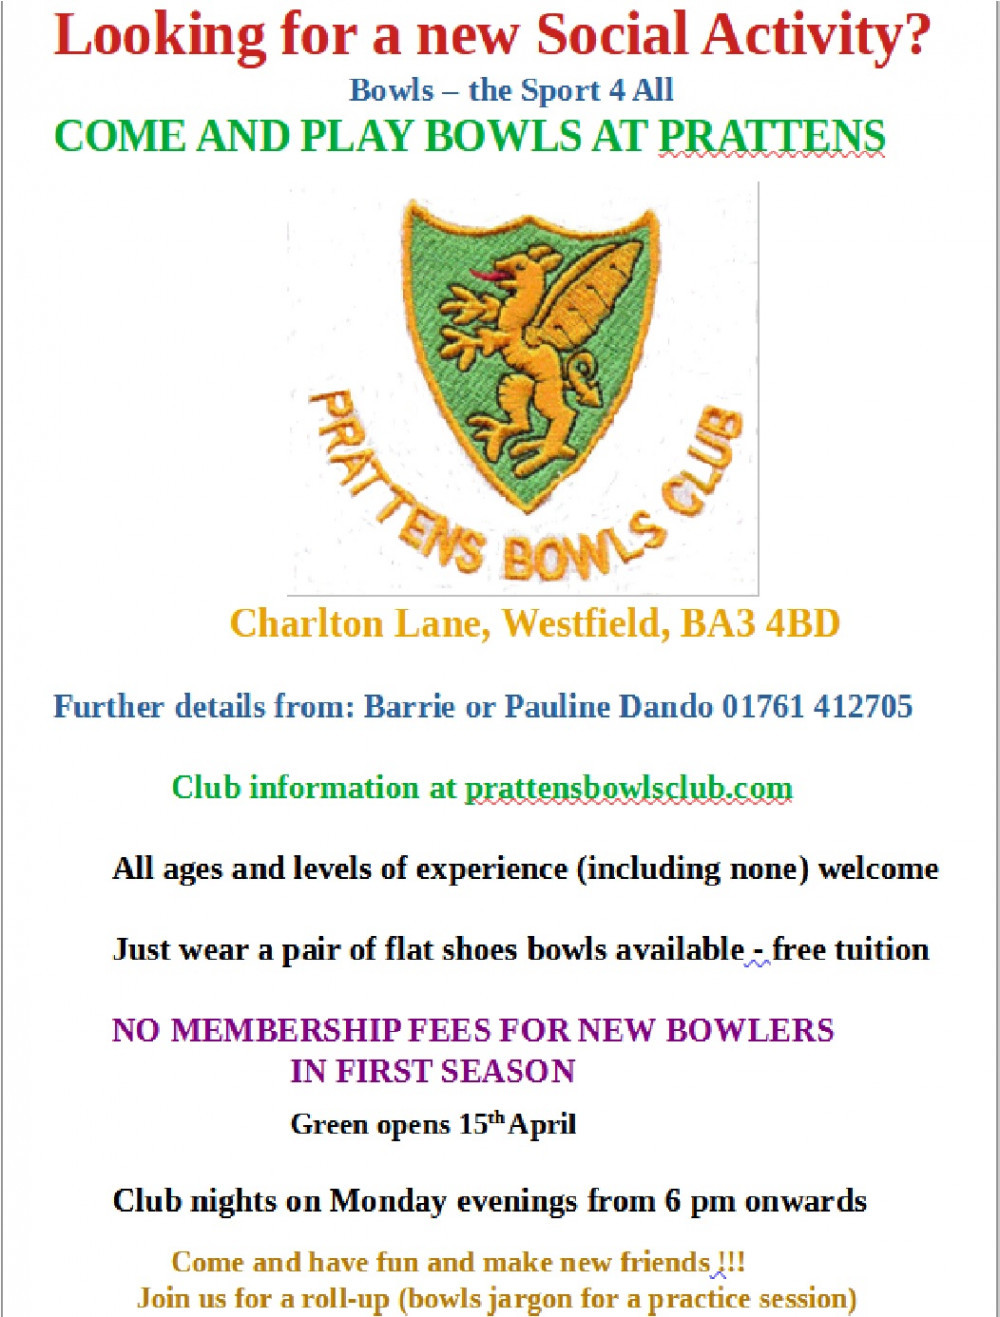 All welcome at this local club 